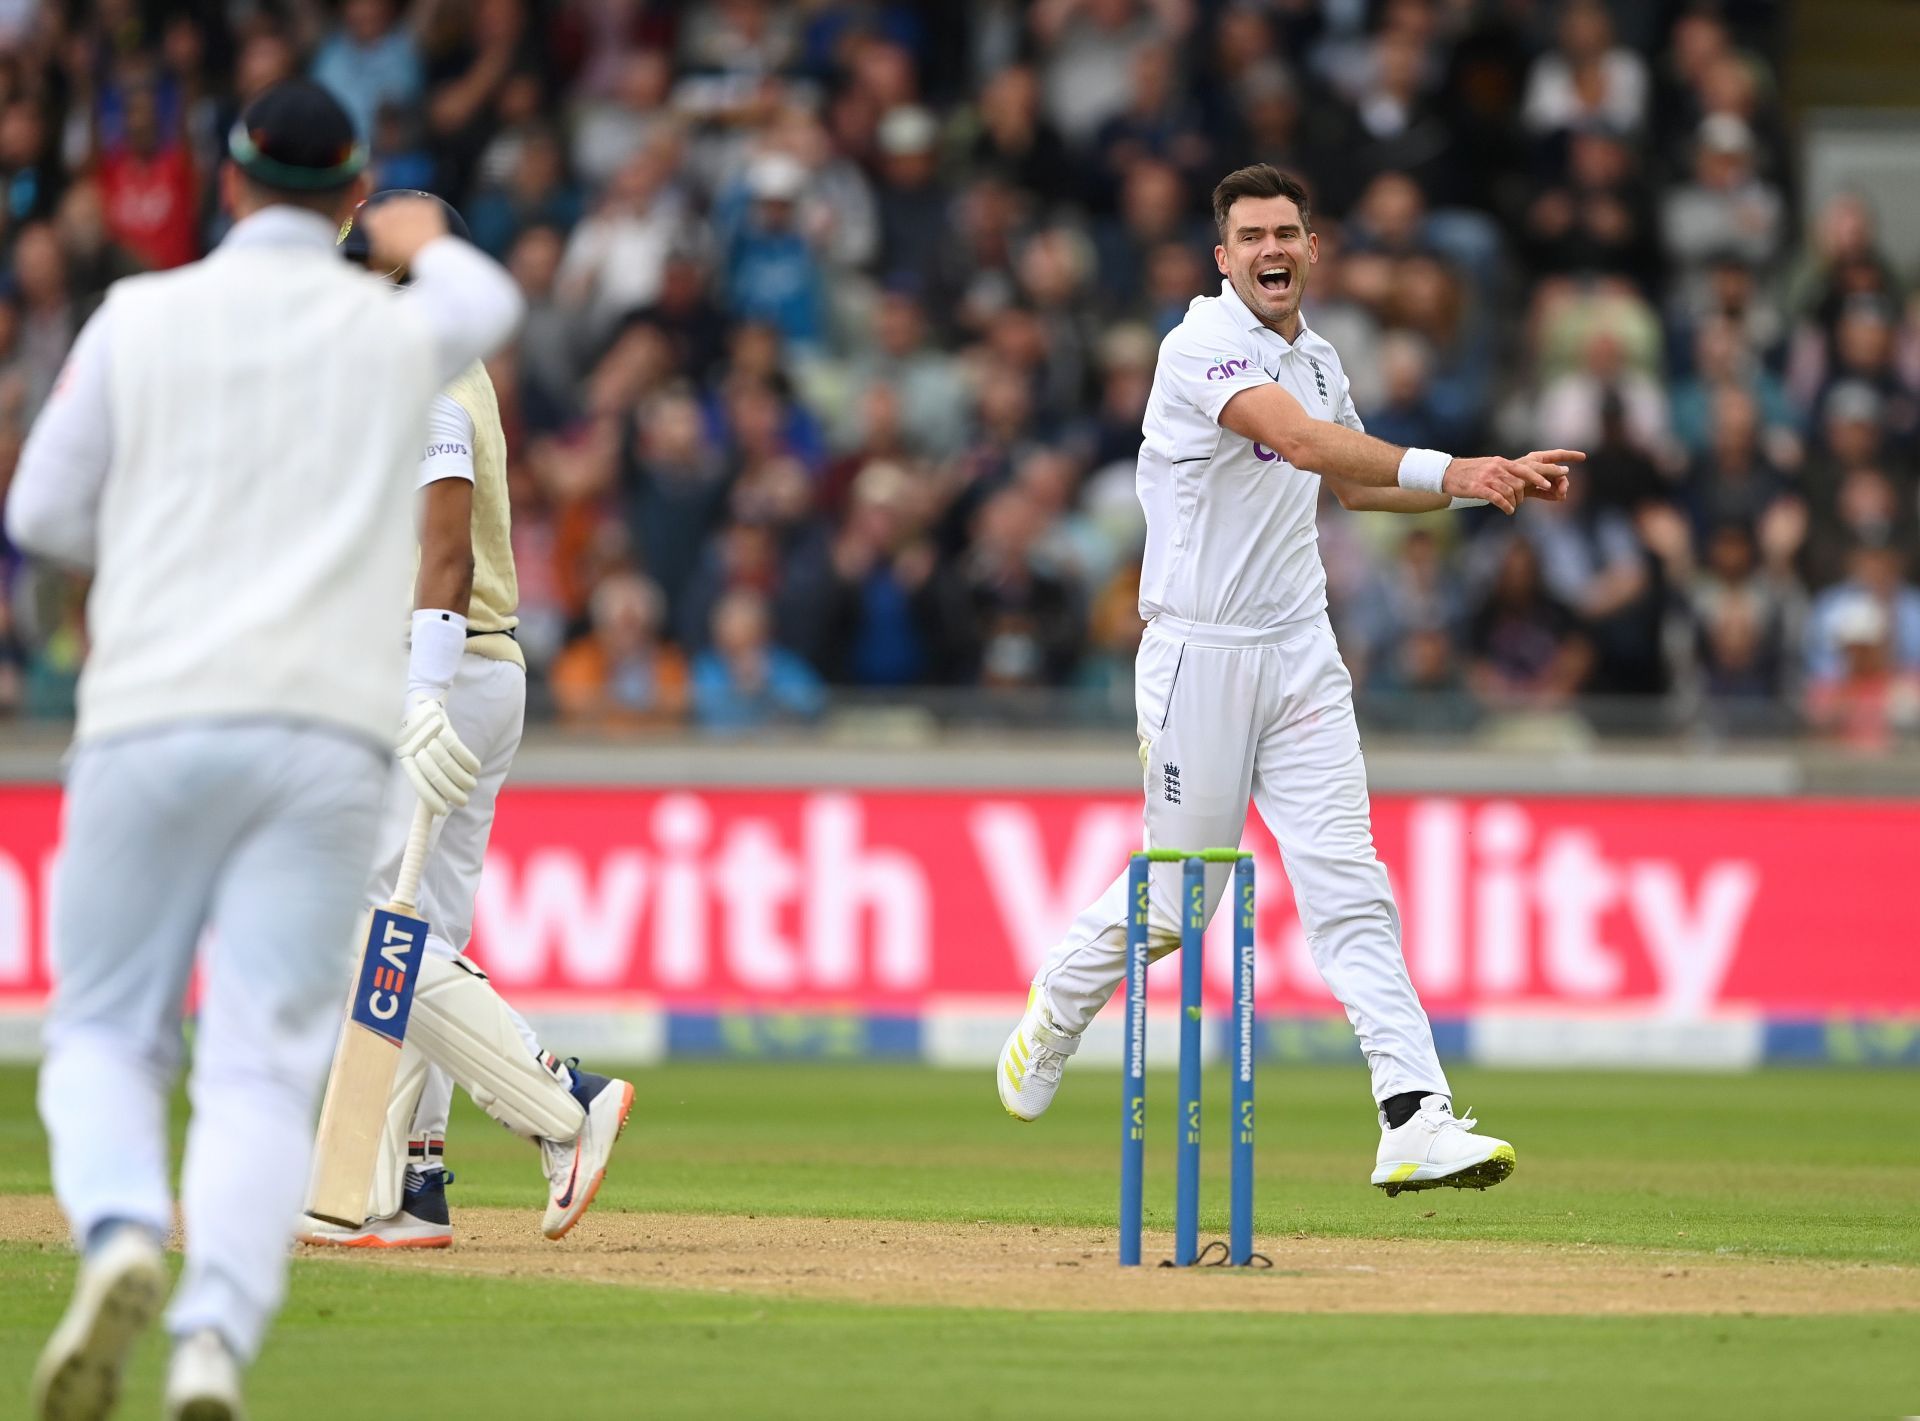 James Anderson celebrates the wicket of Shreyas Iyer. Pic: Getty Images